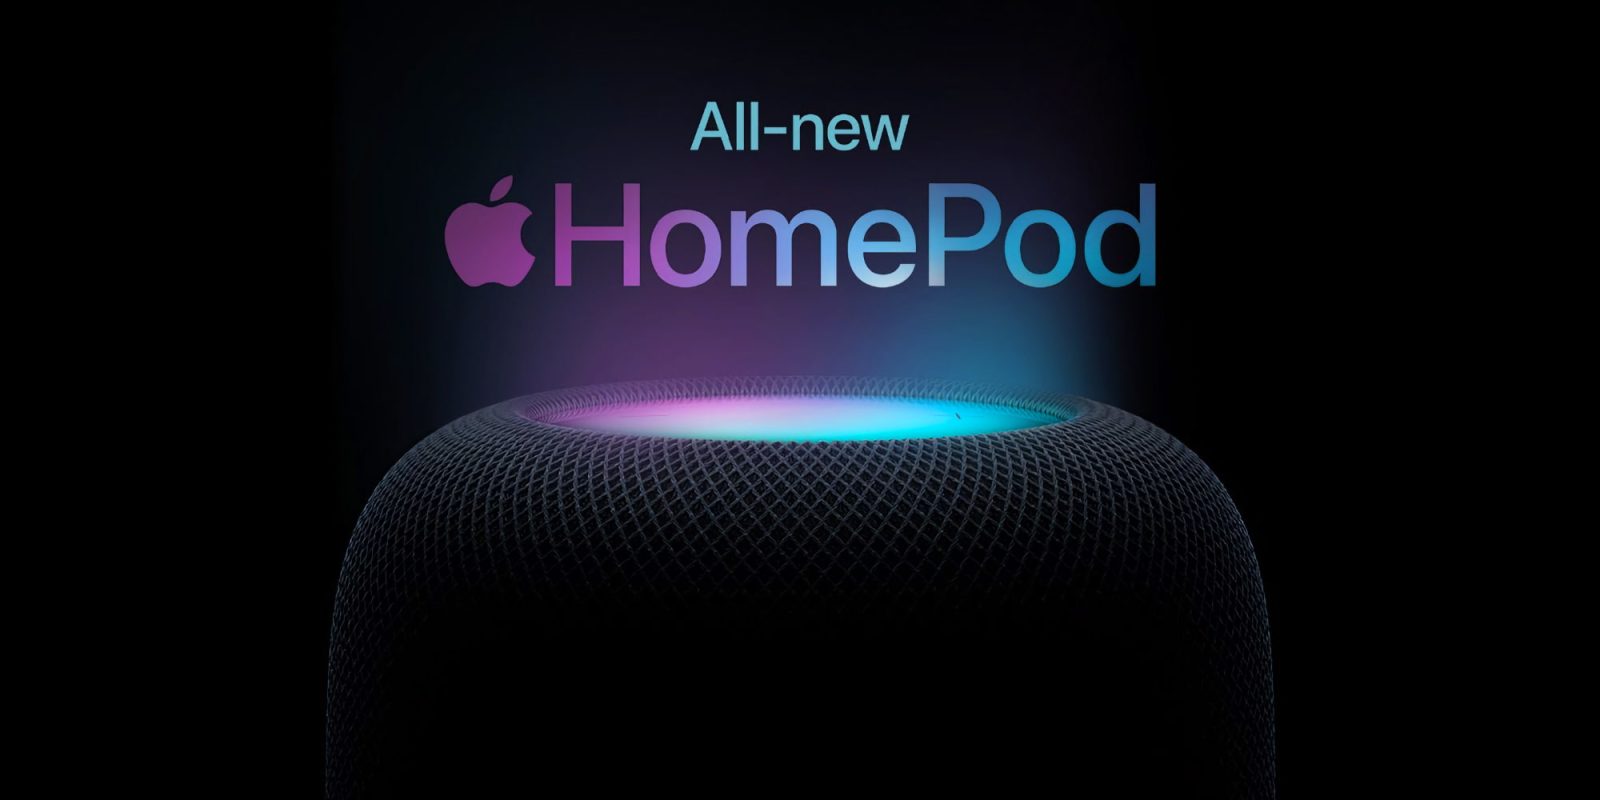 The new HomePod